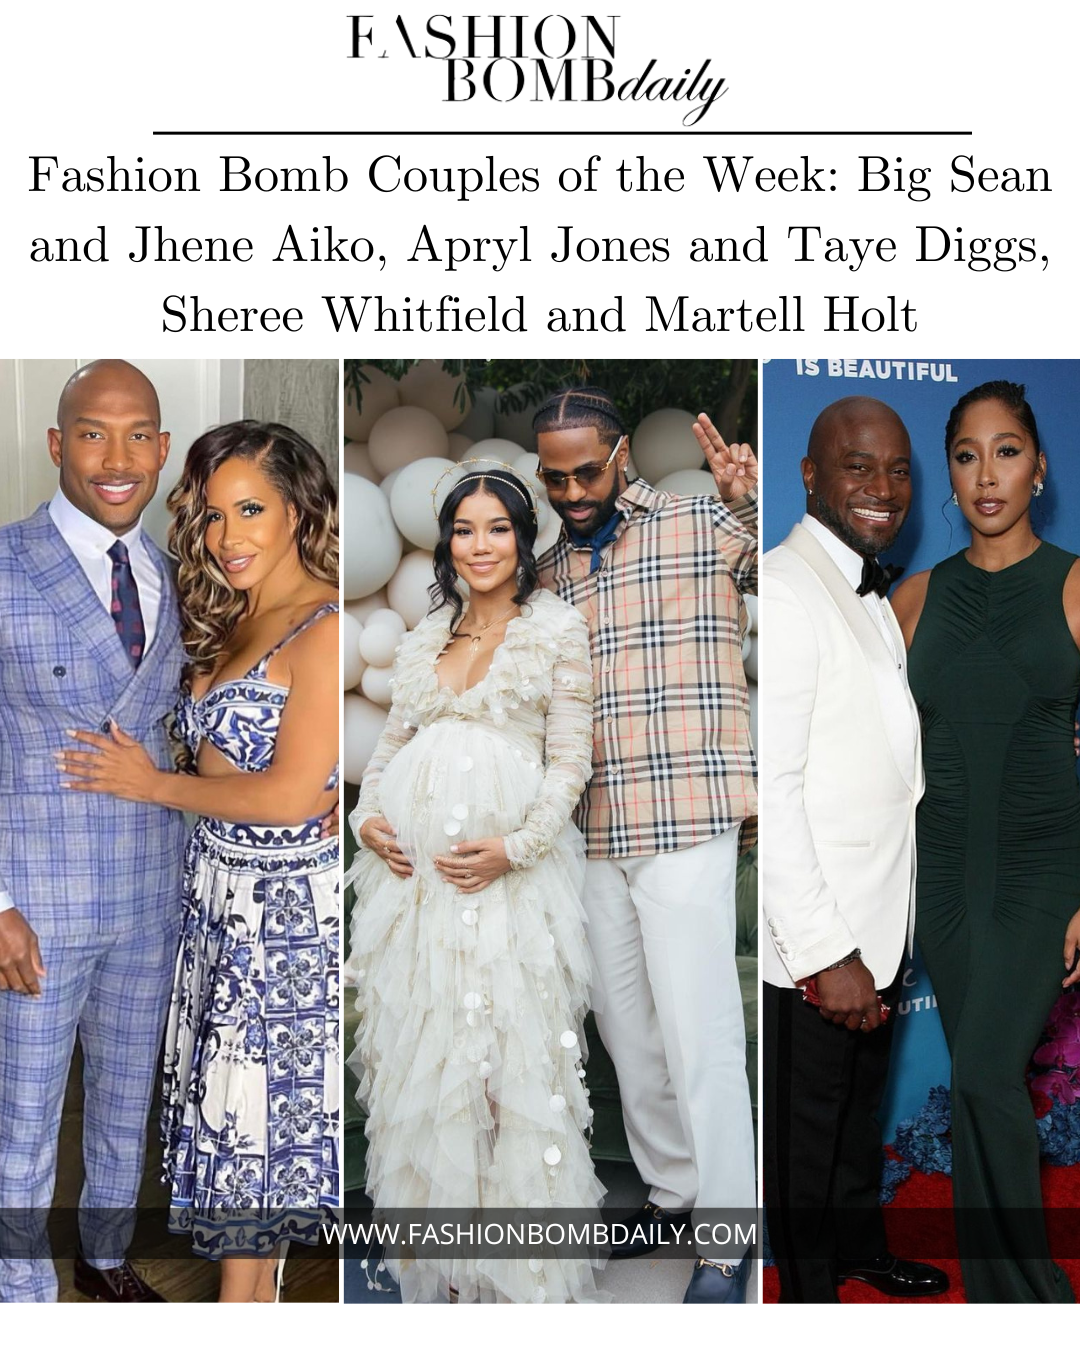 Big Sean and Jhene Aiko, Apryl Jones and Taye Diggs, Sheree Whitfield and Martell Holt